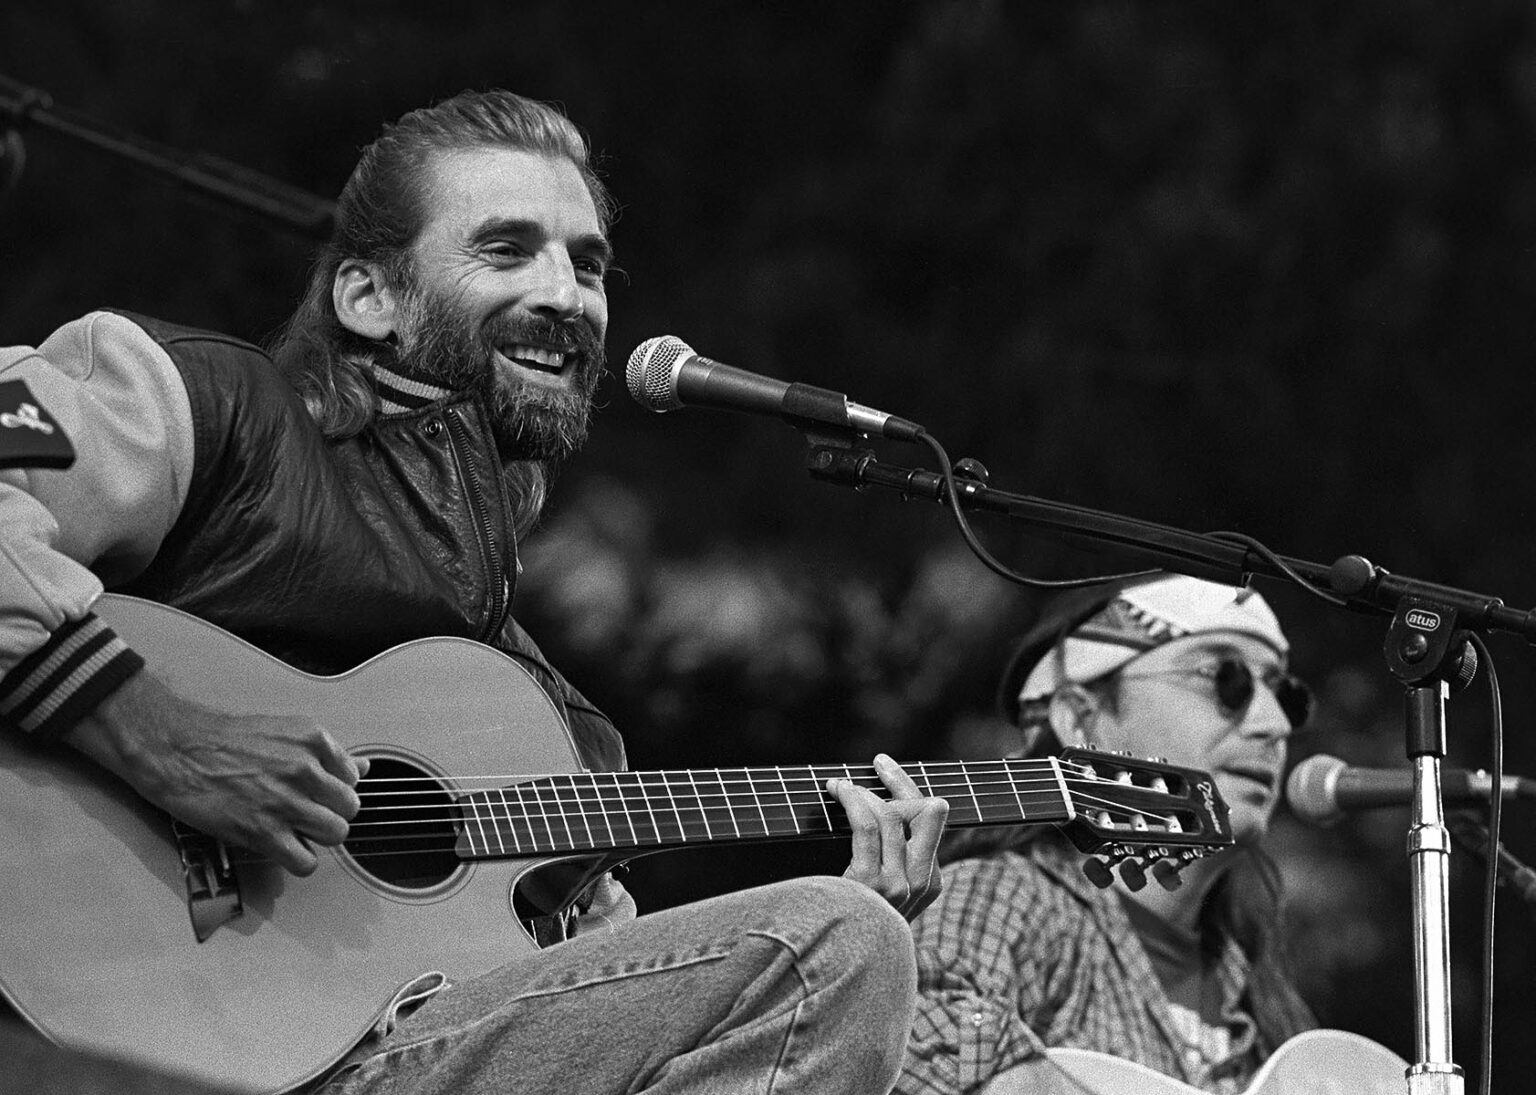 KENNY LOGGINS and JIMMY MESSINA reunite at the Esalen Institute to perform on the 4th of July - CALIFORNIA